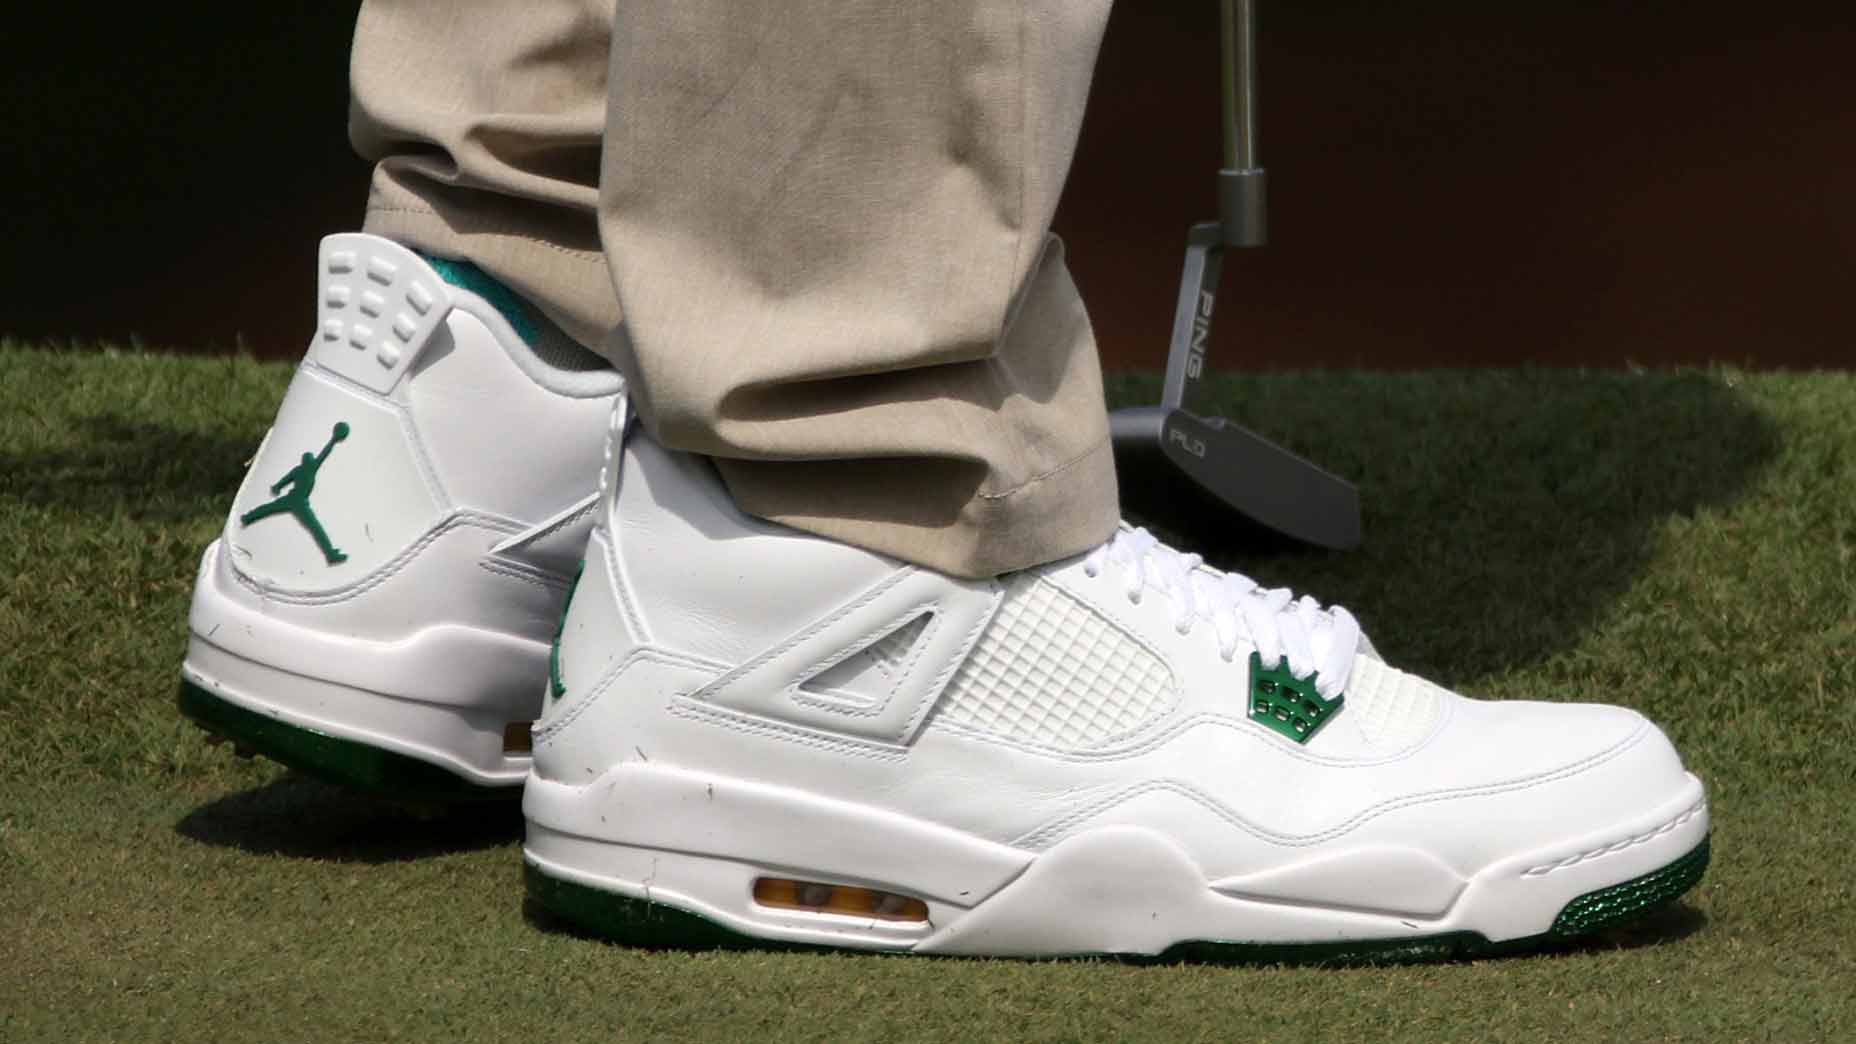 masters nike golf shoes